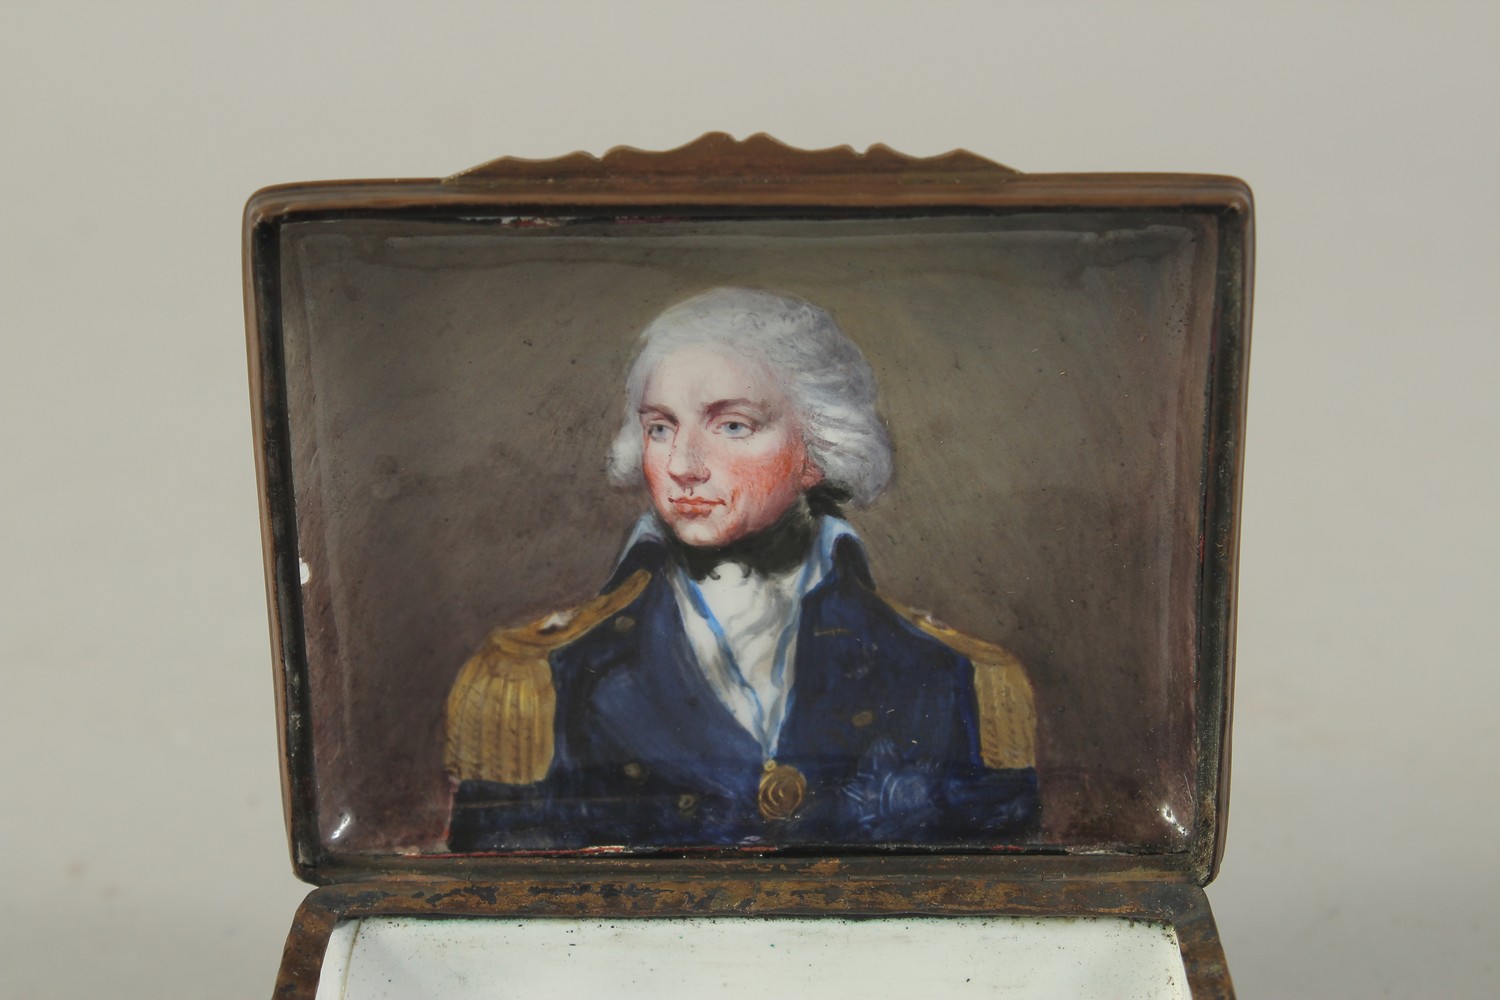 A GOOD 19TH CENTURY LORD NELSON PORCELAIN BOX the lid with a battle scene, the sides with a seascape - Image 6 of 7